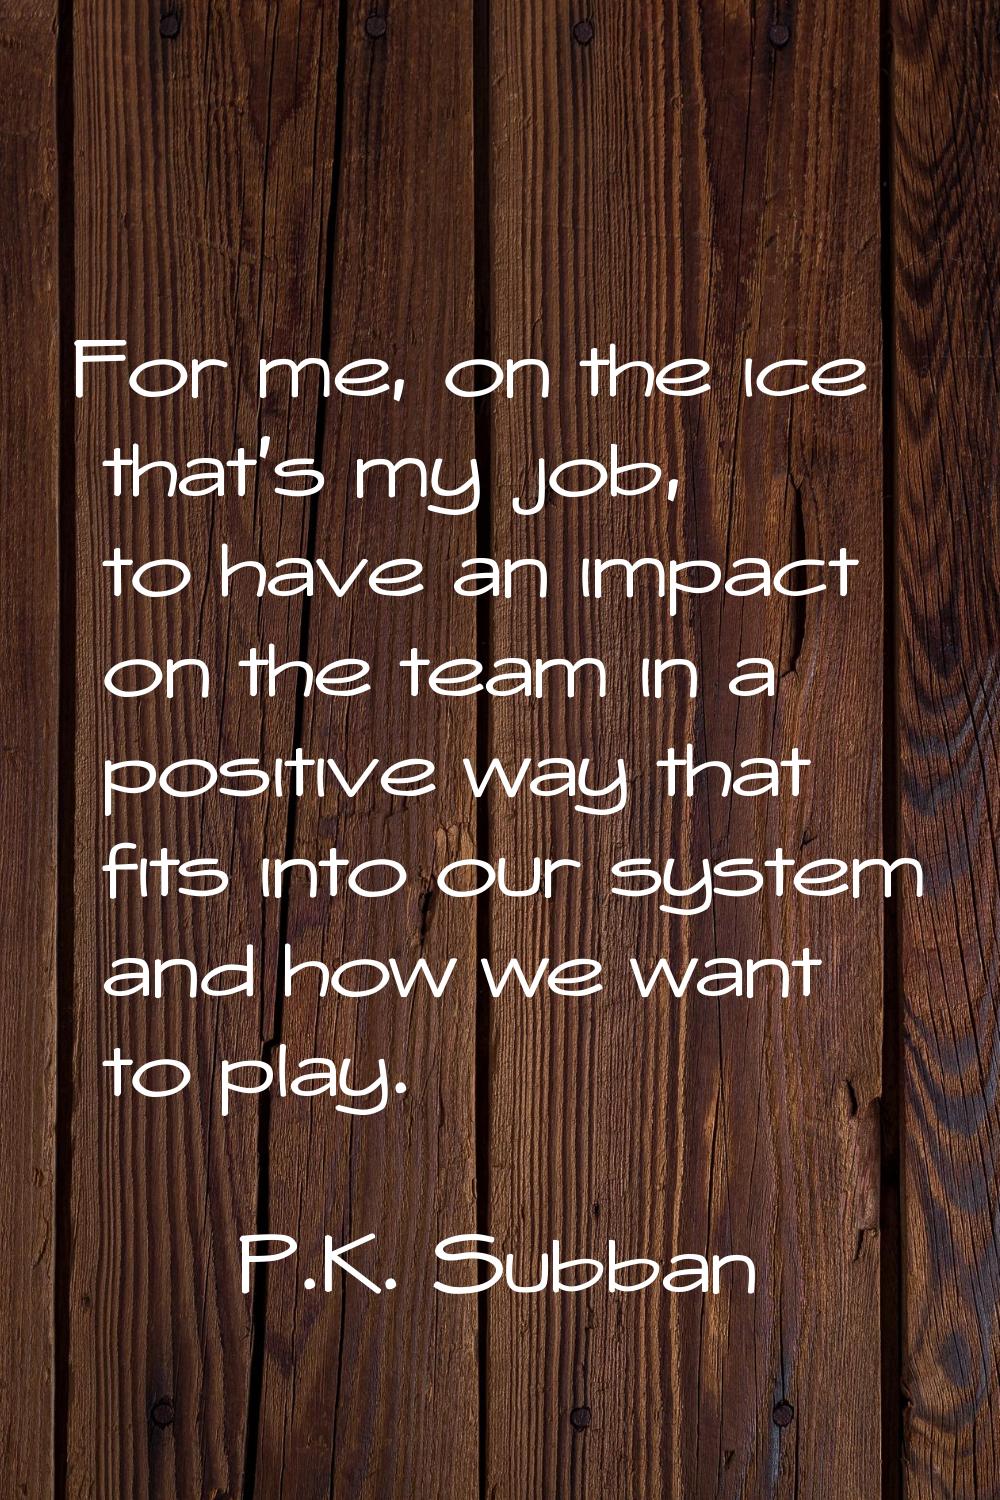 For me, on the ice that's my job, to have an impact on the team in a positive way that fits into ou